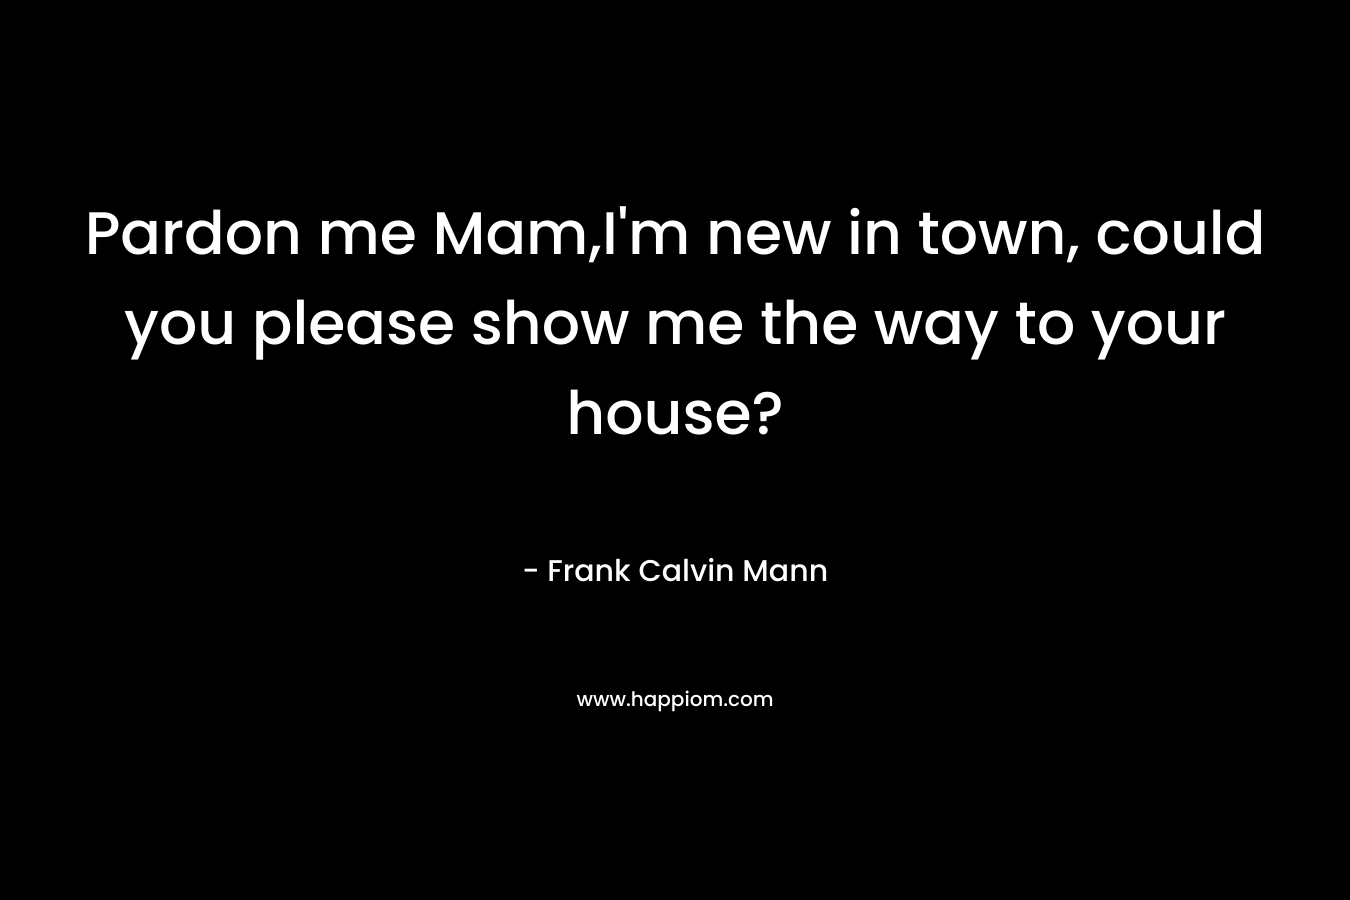 Pardon me Mam,I’m new in town, could you please show me the way to your house? – Frank Calvin Mann